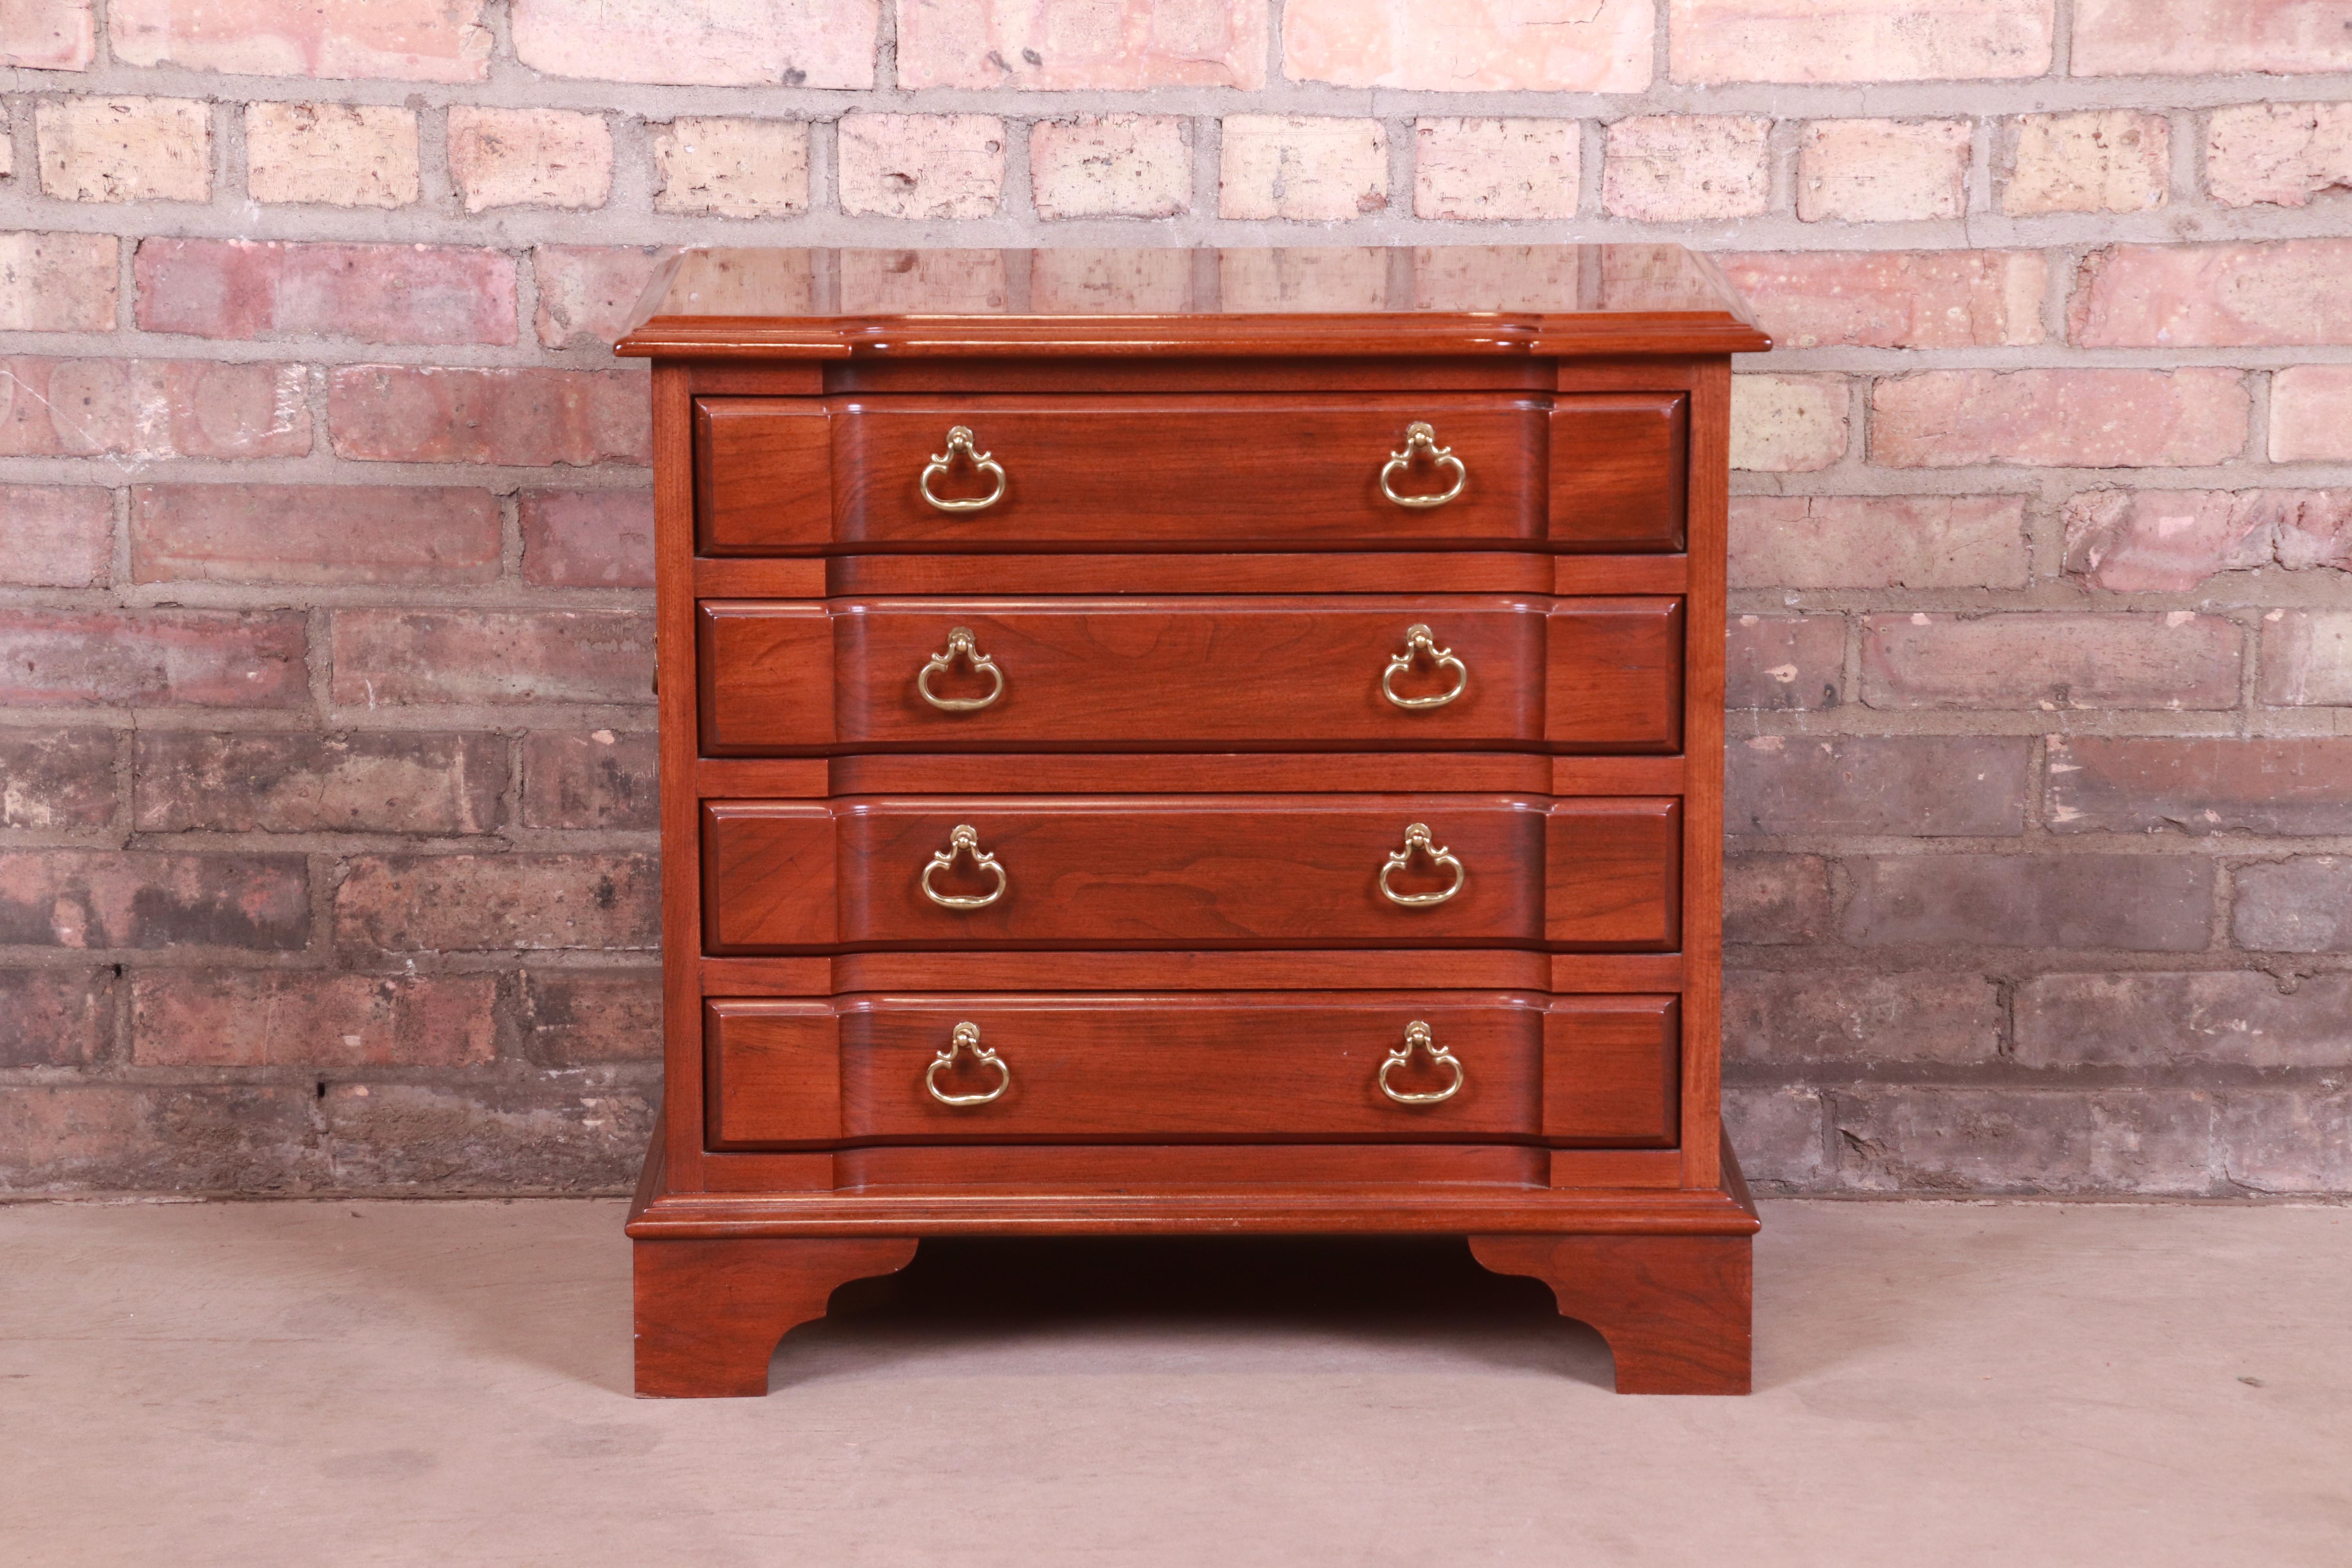 A gorgeous Chippendale style four drawer chest or nightstand

USA, Circa 1980s

Carved mahogany, with original brass hardware.

Measures: 22.5